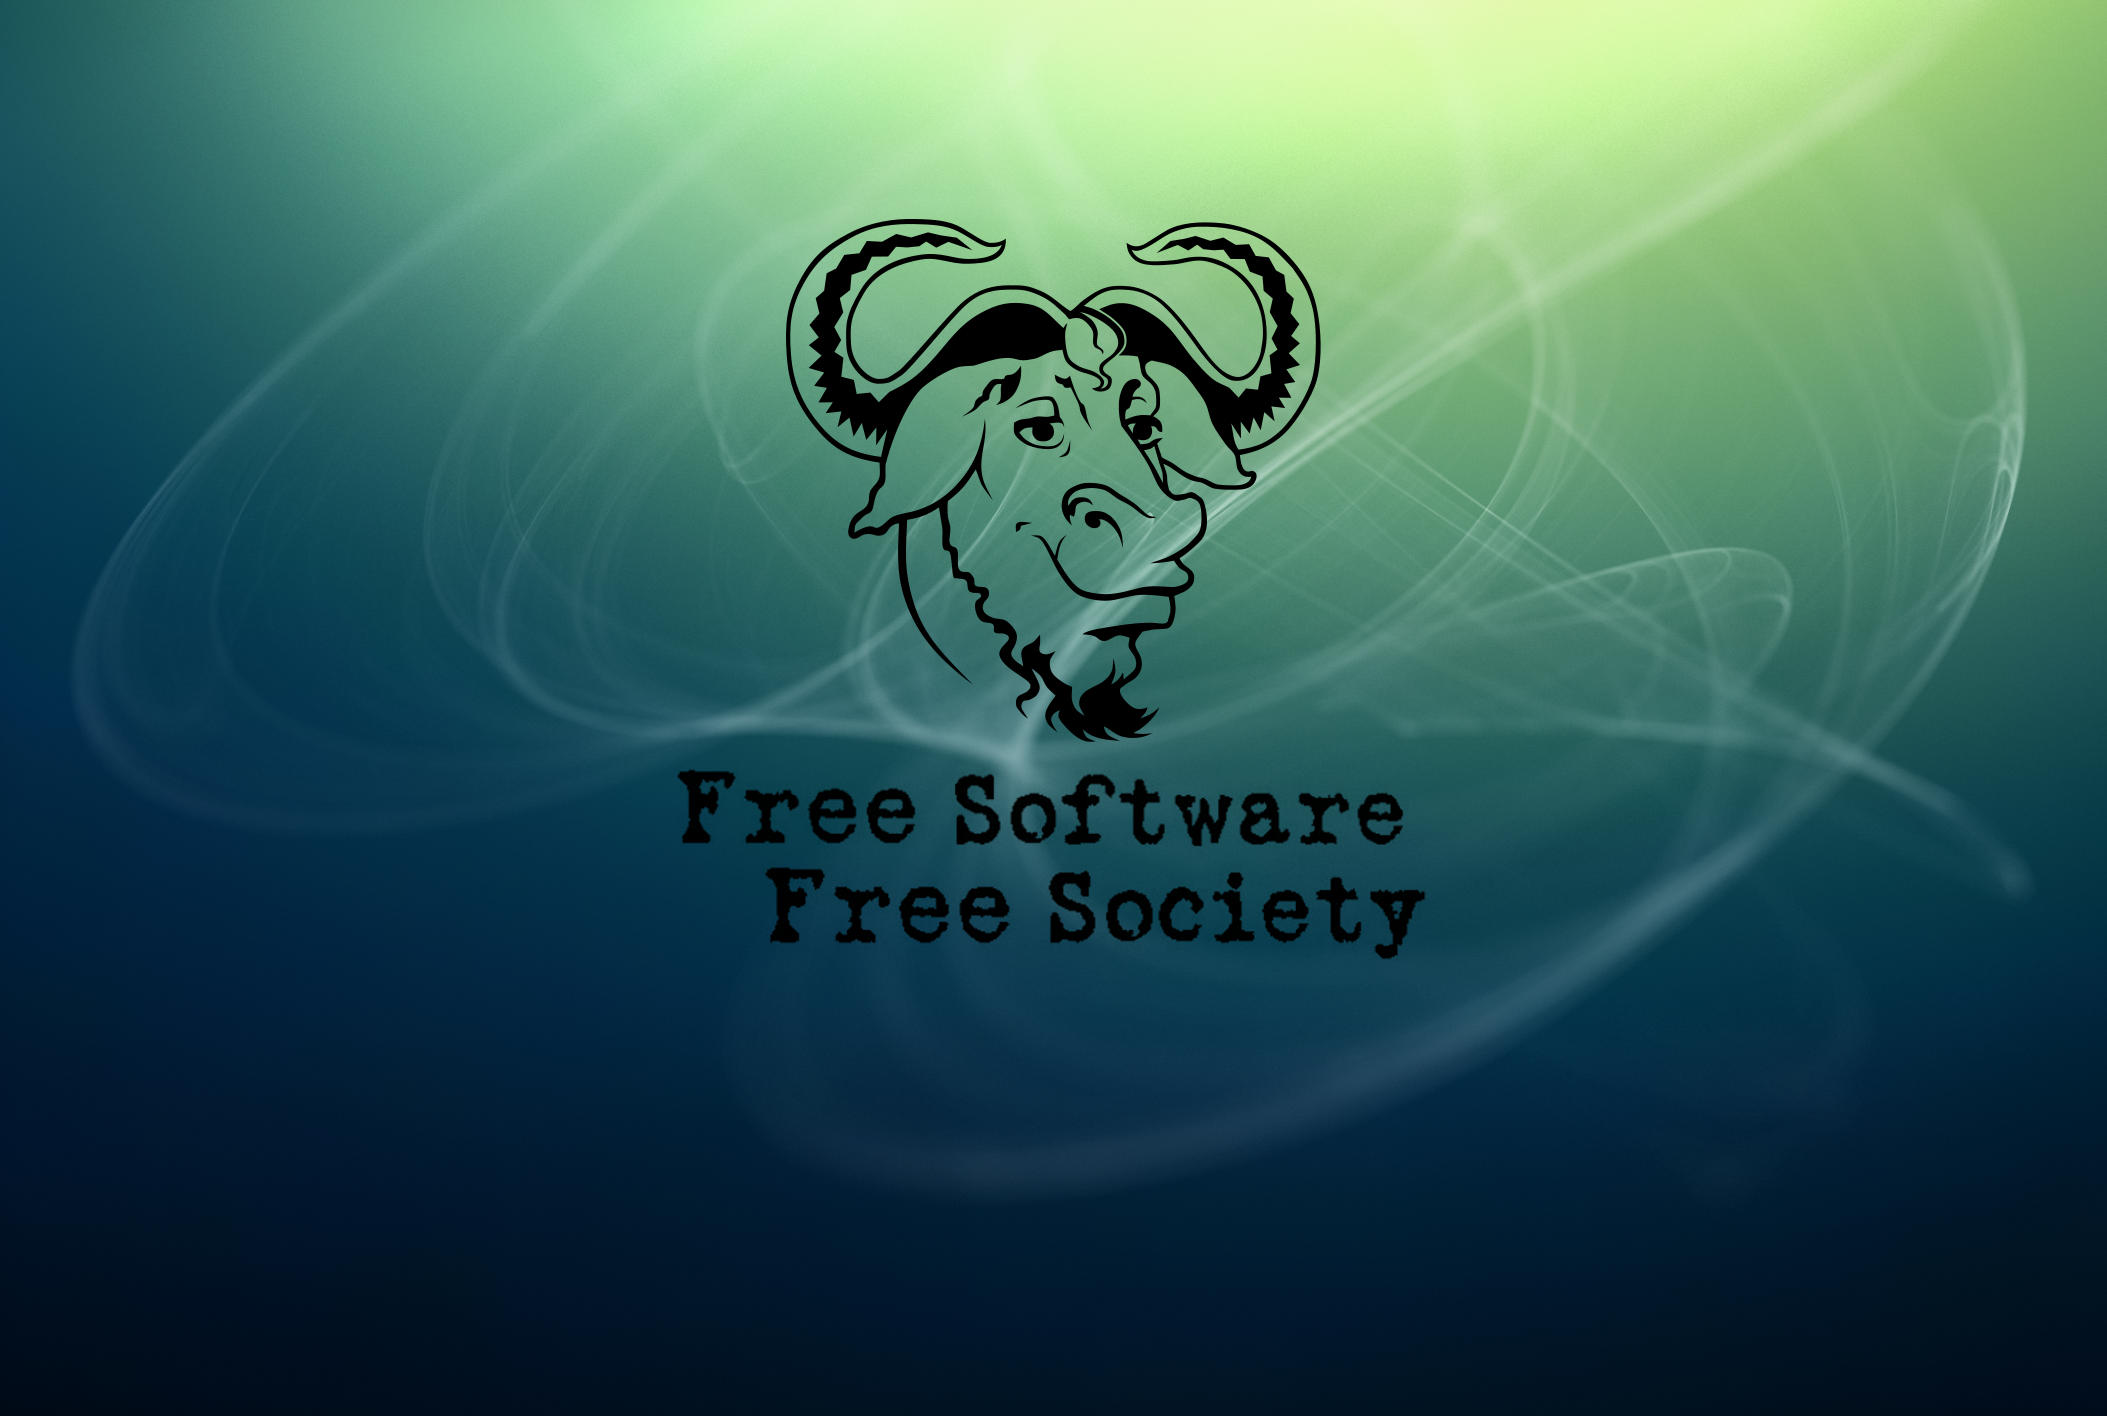 1920x1080 / 1920x1080 tux software gnu linux free software gpl linux  operative system wallpaper JPG 67 kB - Coolwallpapers.me!